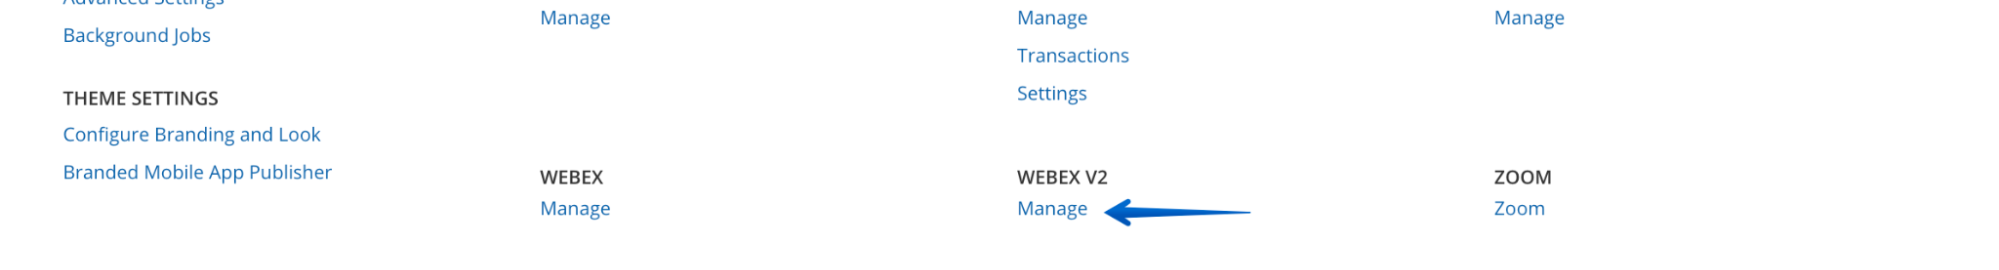 Pressing the Manage link in the Webex V2 Section